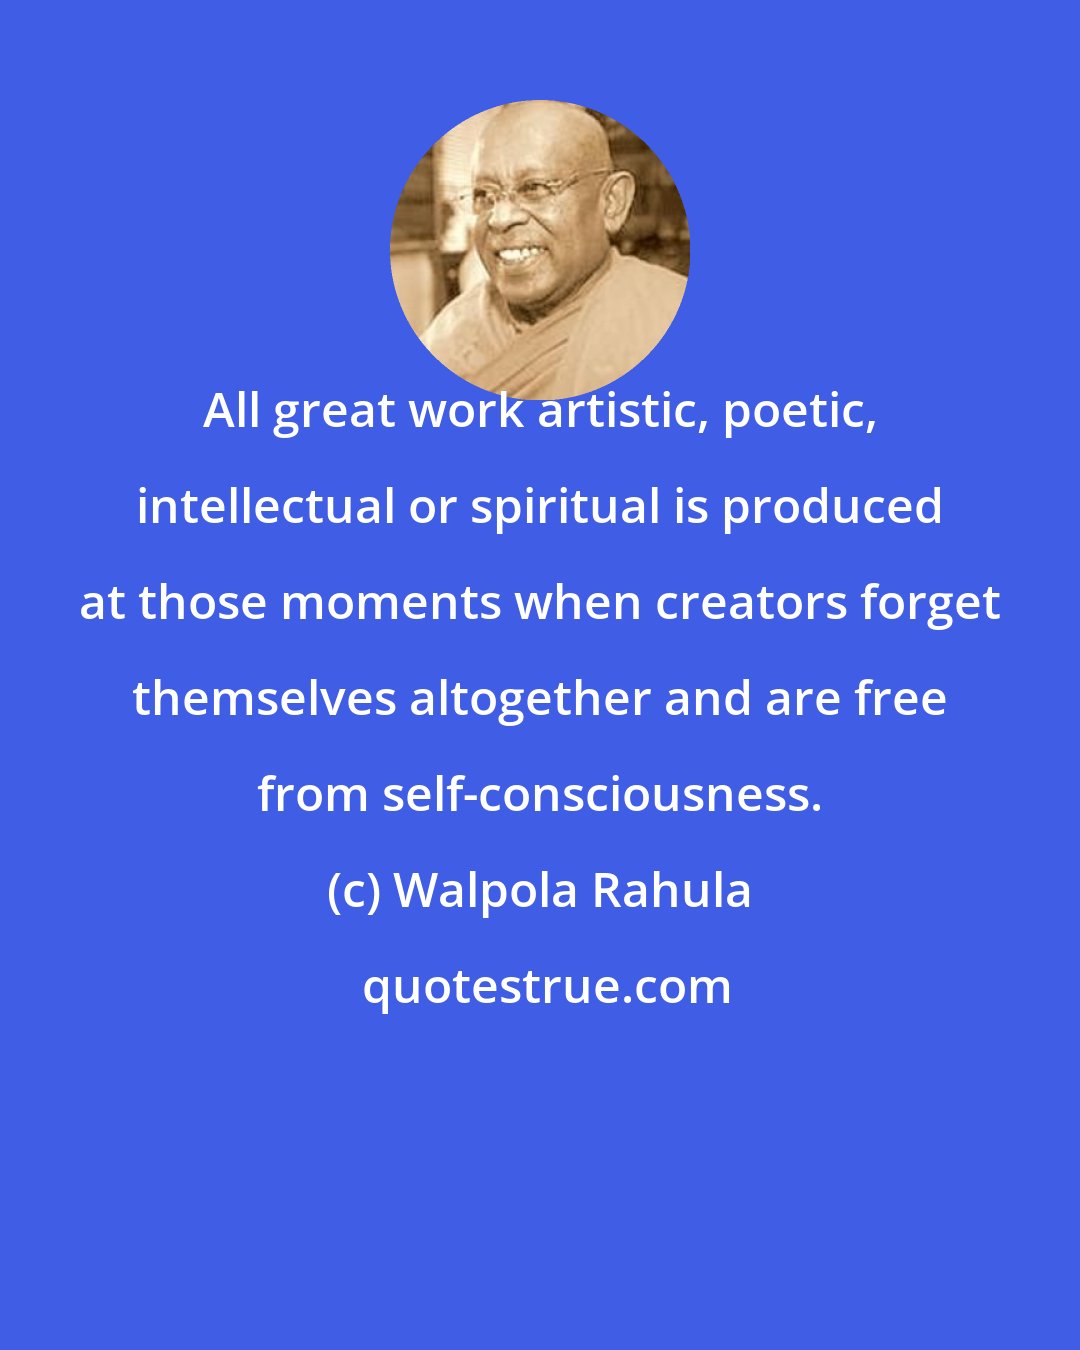 Walpola Rahula: All great work artistic, poetic, intellectual or spiritual is produced at those moments when creators forget themselves altogether and are free from self-consciousness.